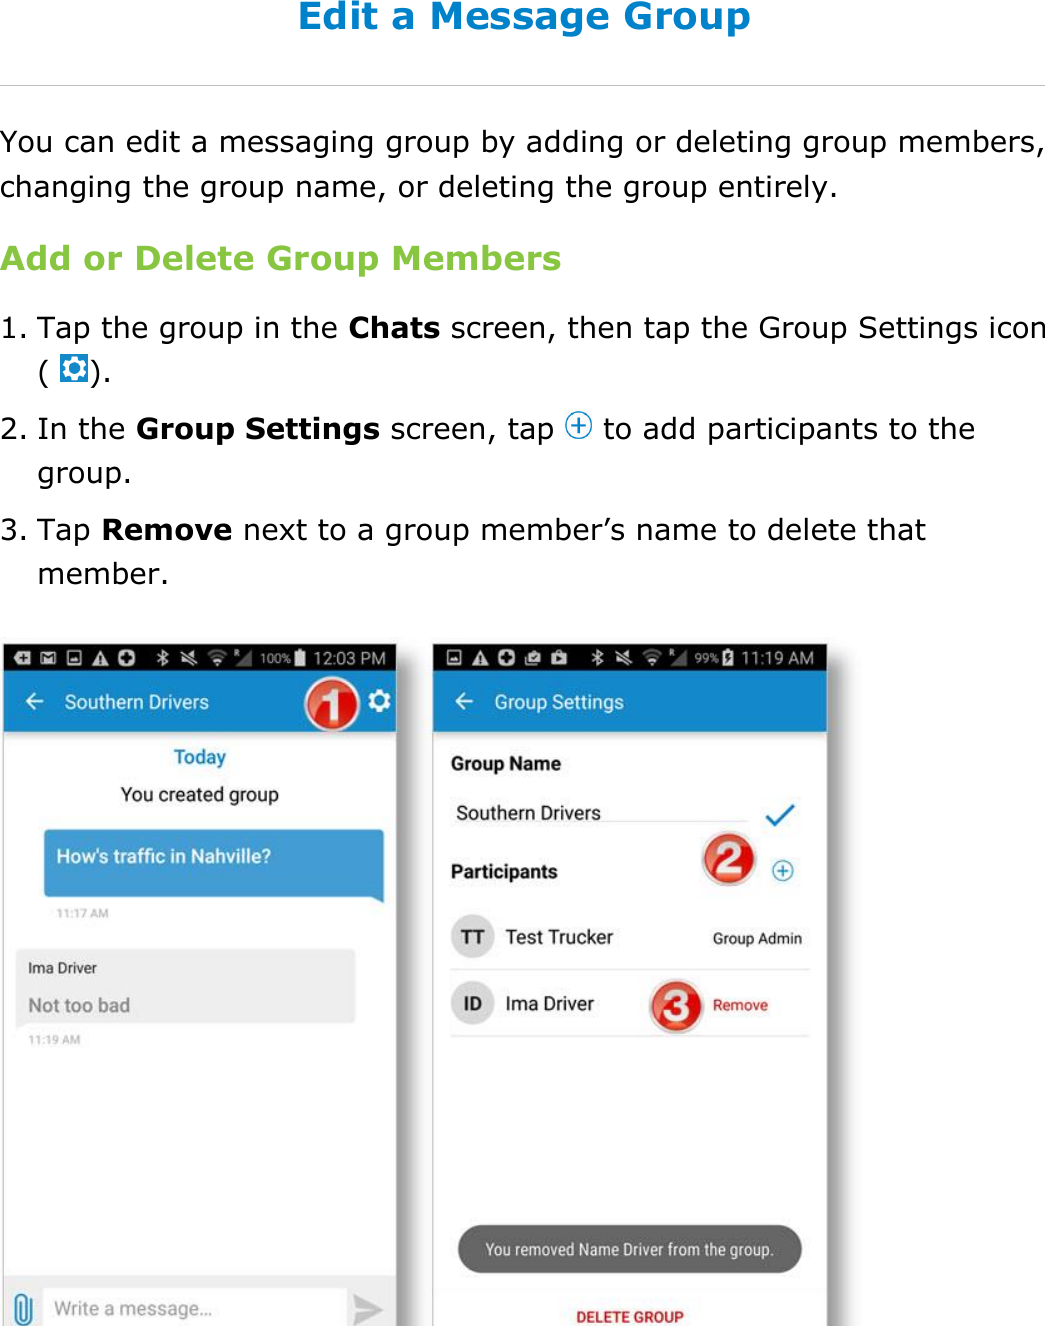 Send Messages, Forms, and Workflows DriverConnect User Guide  74 © 2017, Rand McNally, Inc. Edit a Message Group You can edit a messaging group by adding or deleting group members, changing the group name, or deleting the group entirely. Add or Delete Group Members 1. Tap the group in the Chats screen, then tap the Group Settings icon (  ). 2. In the Group Settings screen, tap   to add participants to the group. 3. Tap Remove next to a group member’s name to delete that member.    